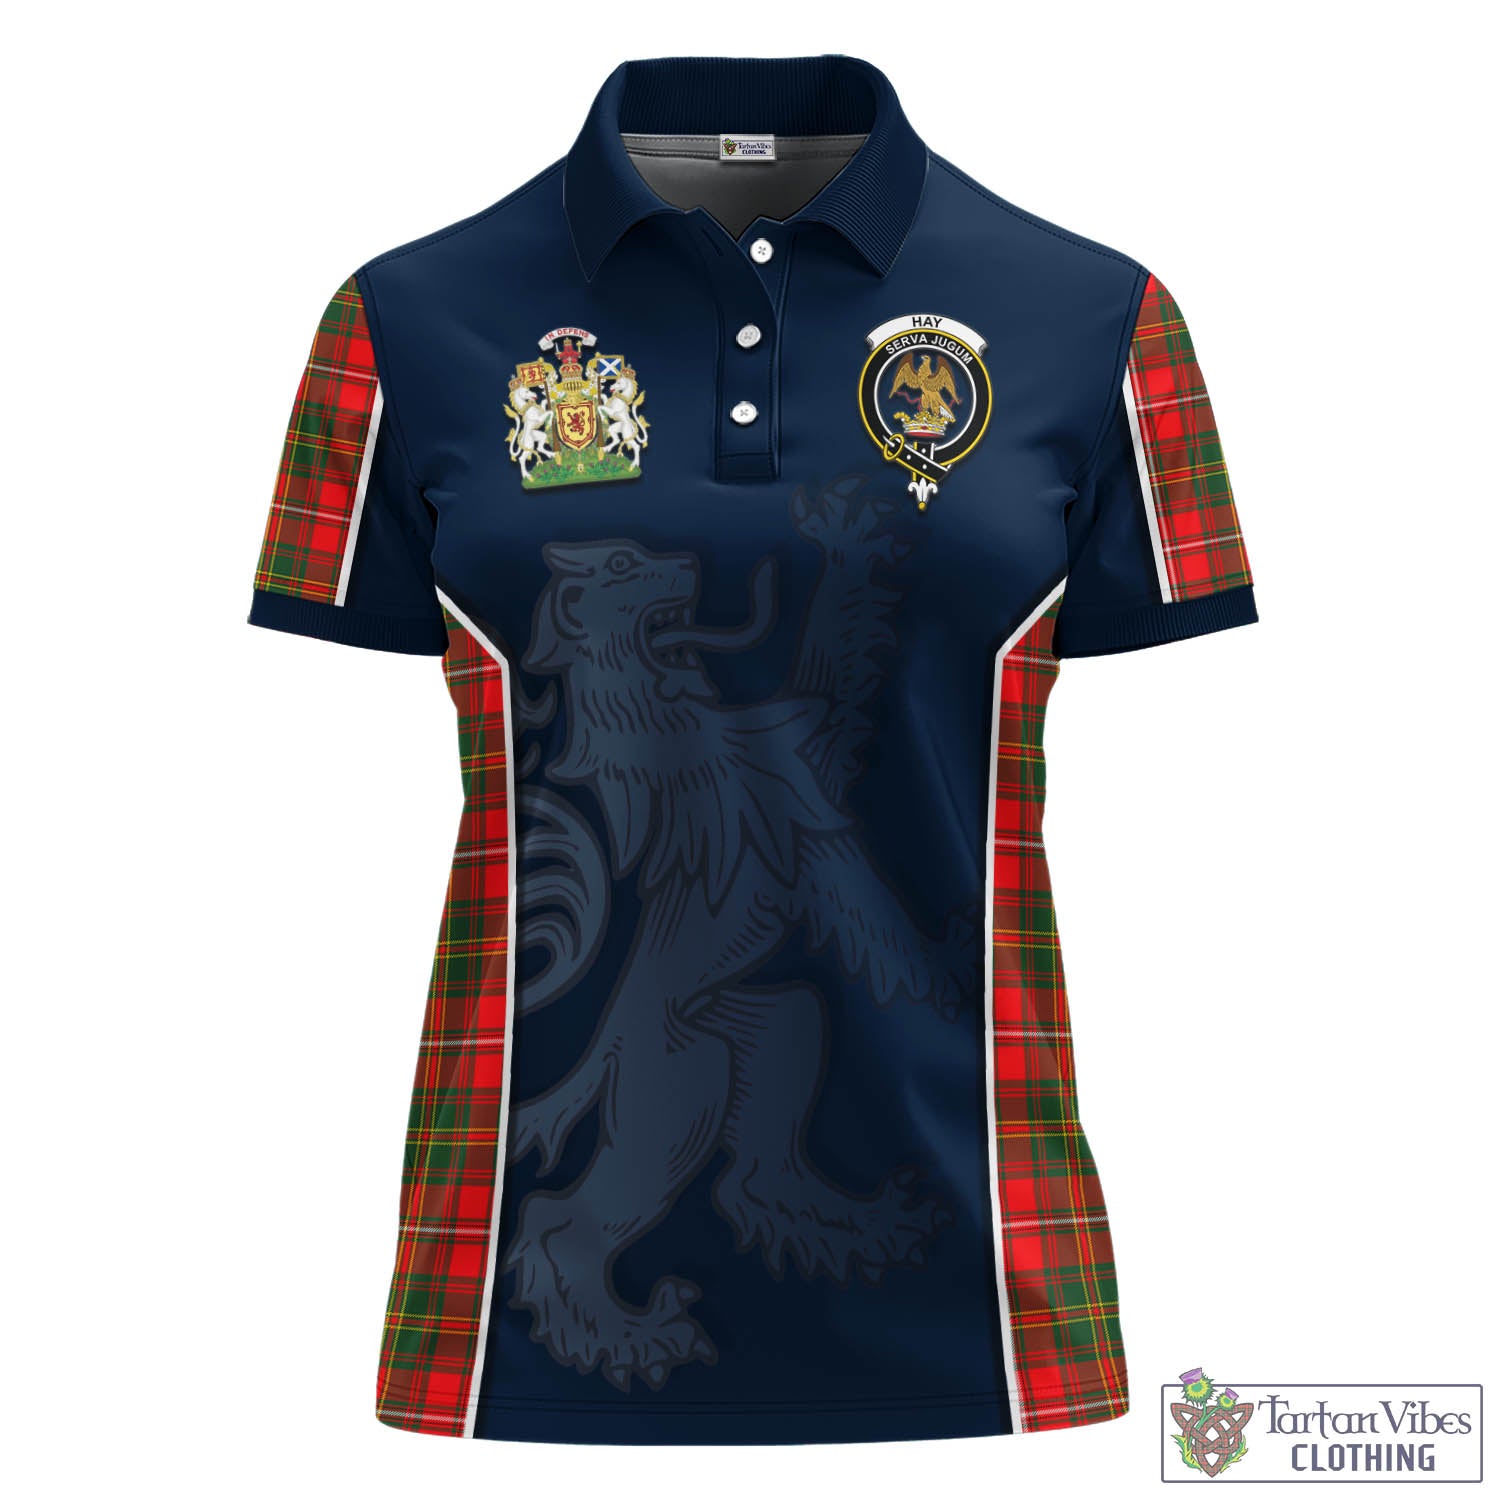 Tartan Vibes Clothing Hay Modern Tartan Women's Polo Shirt with Family Crest and Lion Rampant Vibes Sport Style